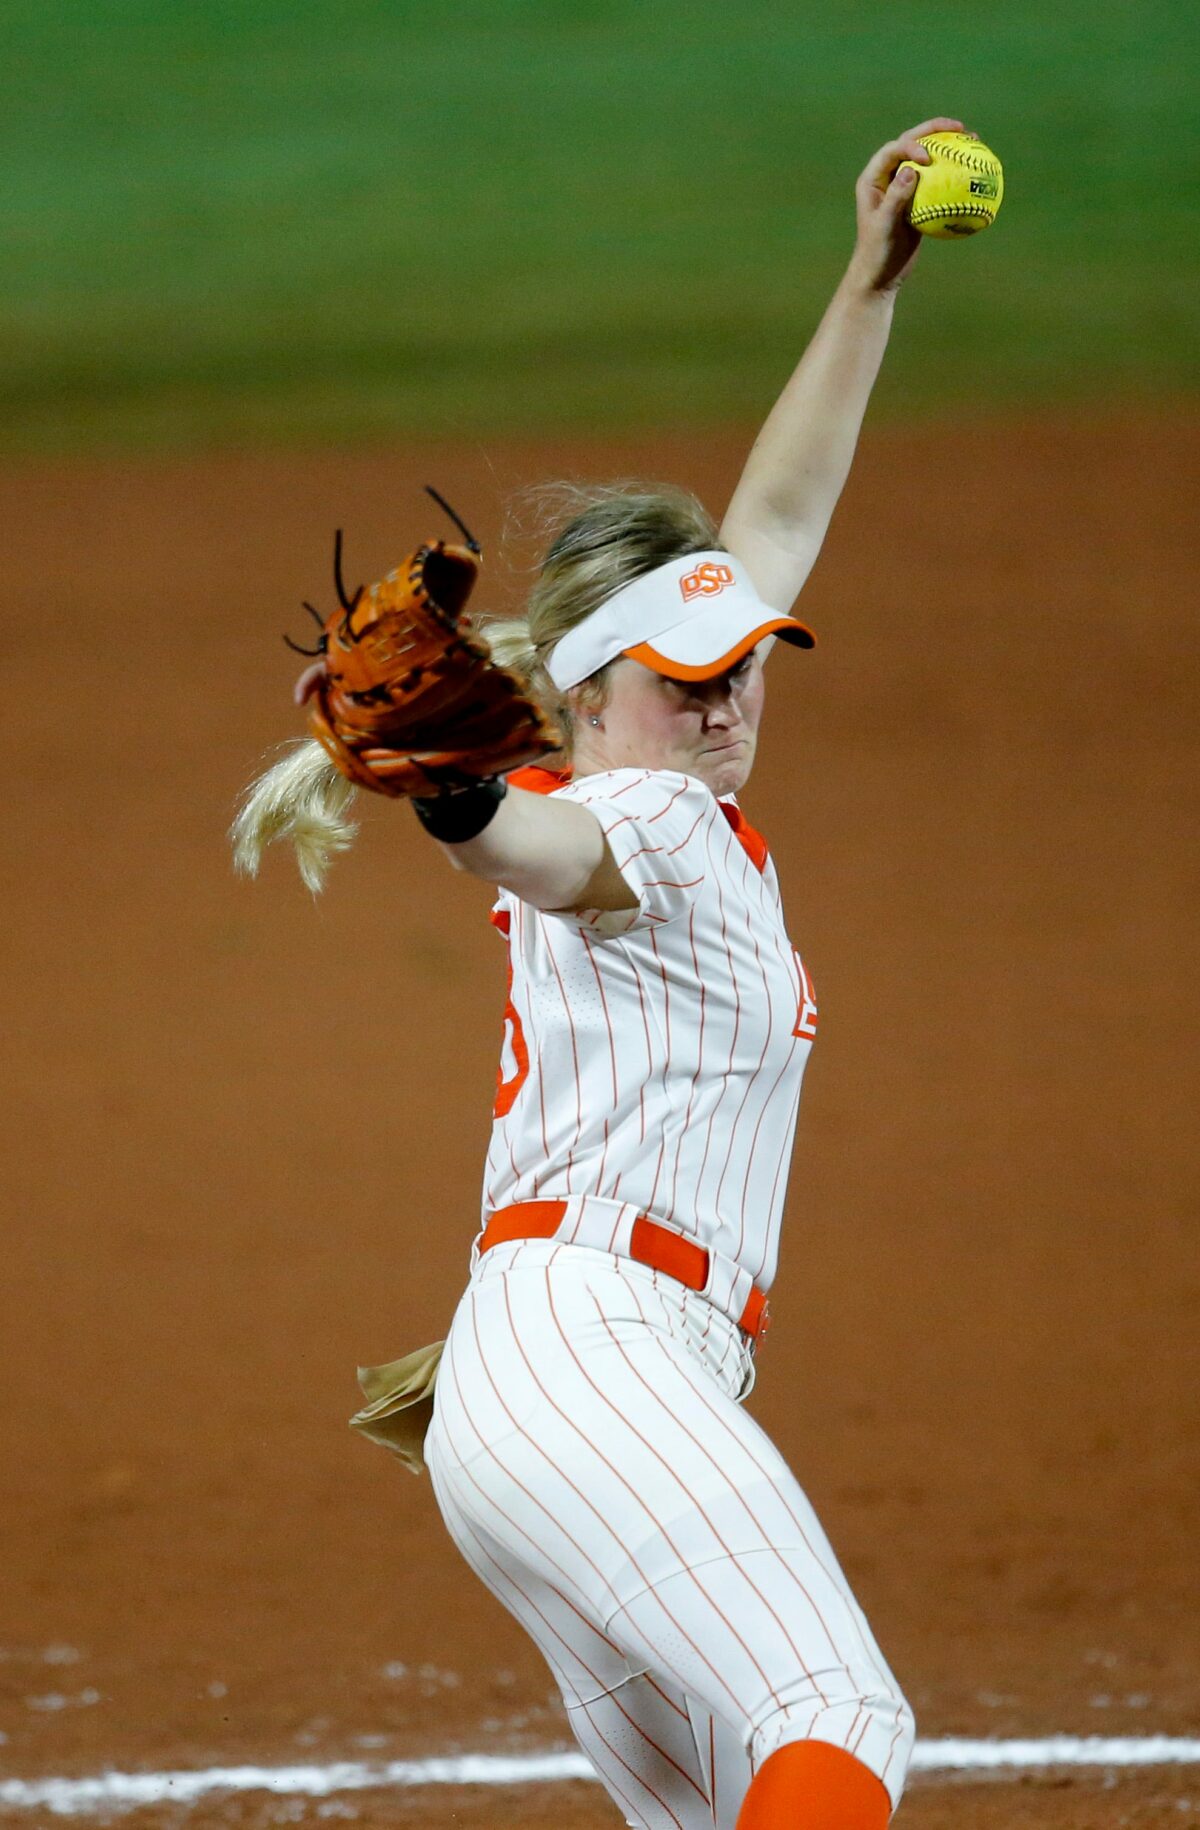 Oklahoma State pitcher Kelly Maxwell to join the Oklahoma Sooners per report